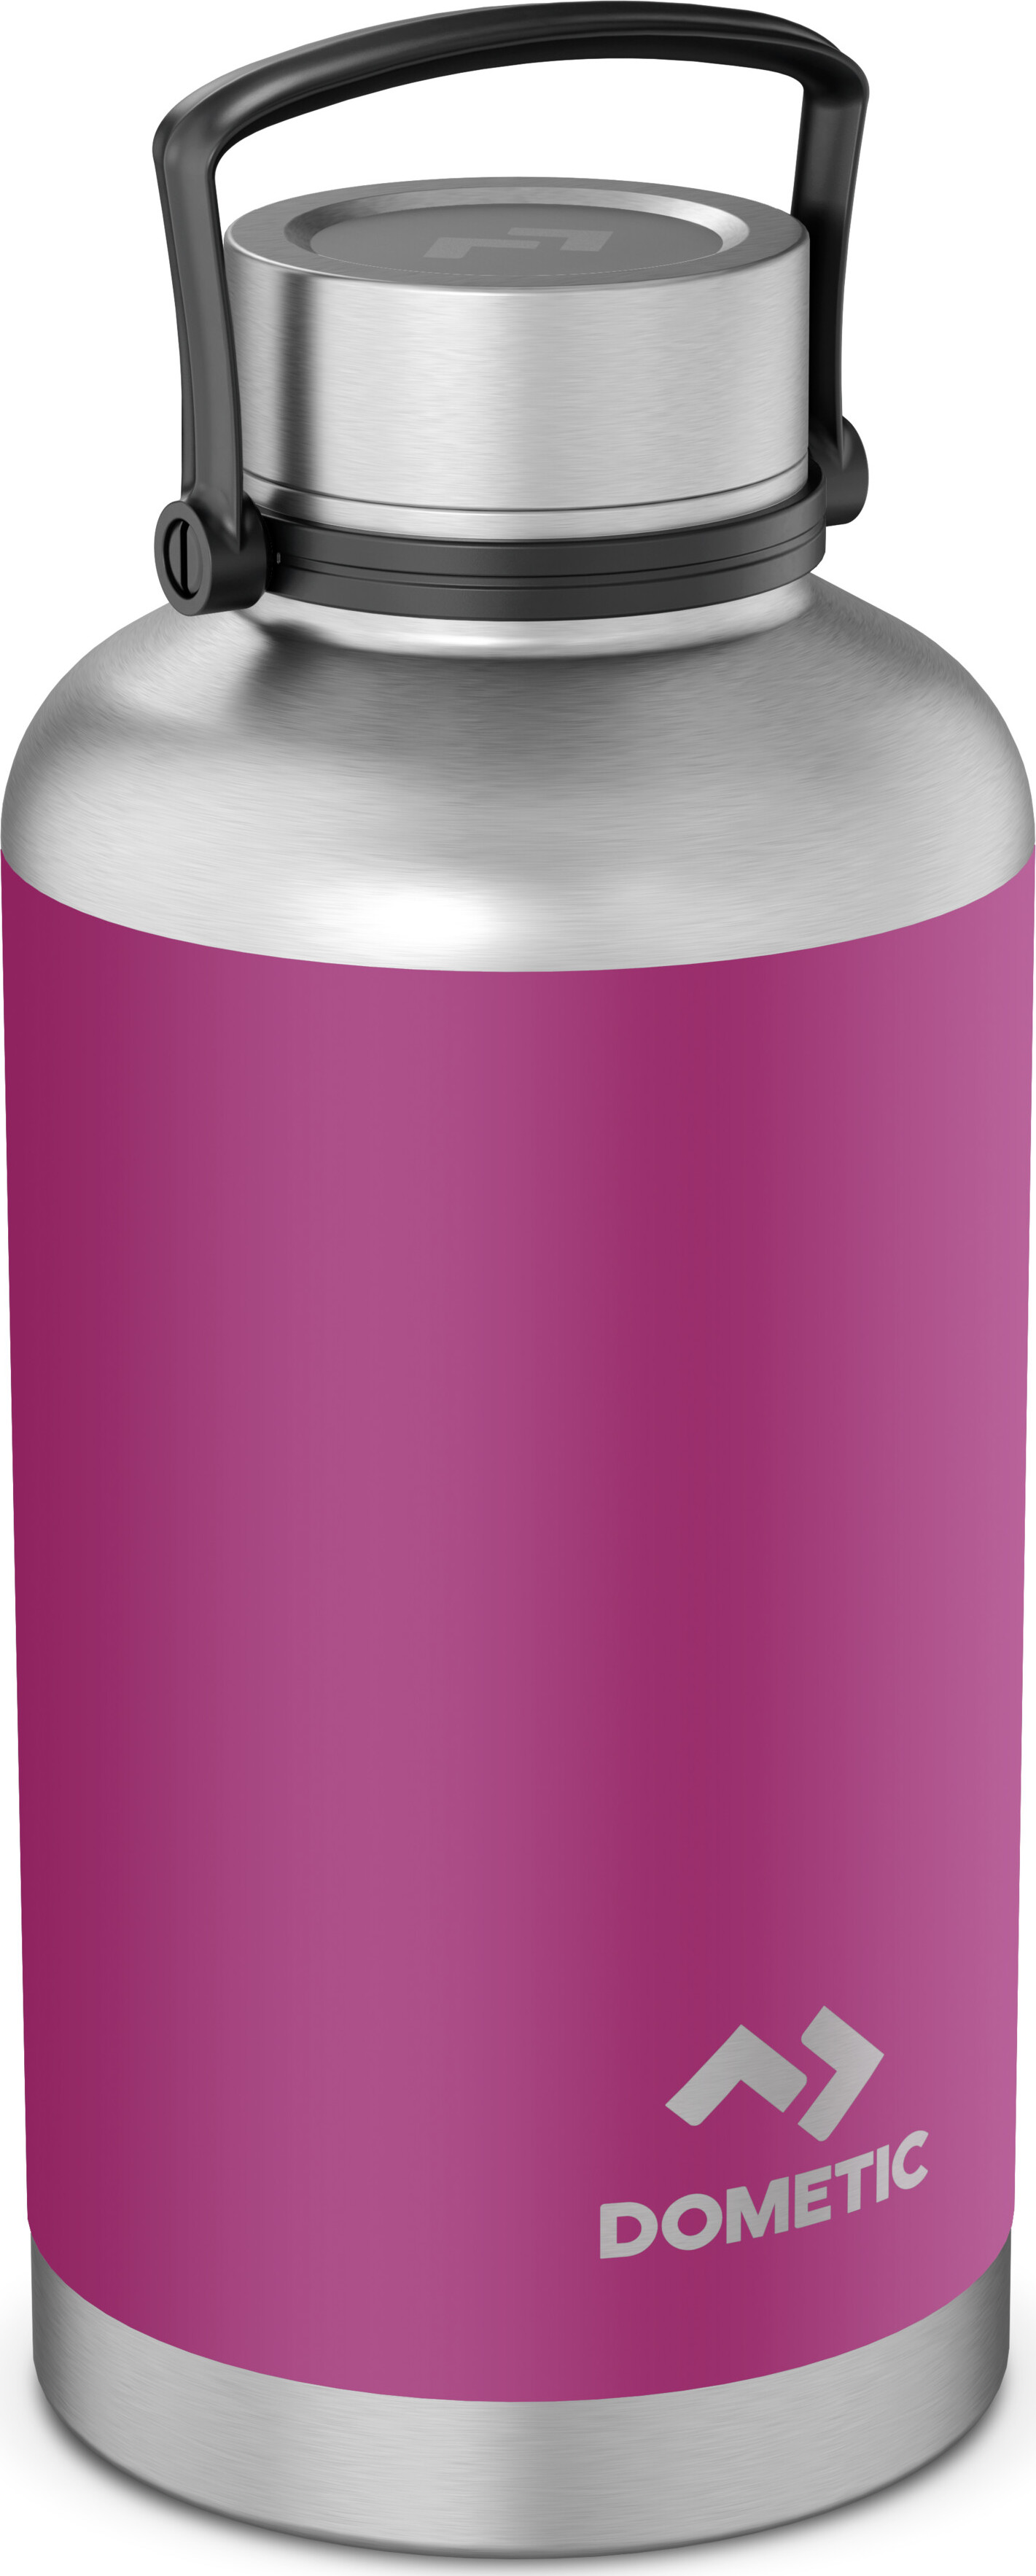 Dometic Drinkware 1.5 1920ml Orchid OneSize, Orchid